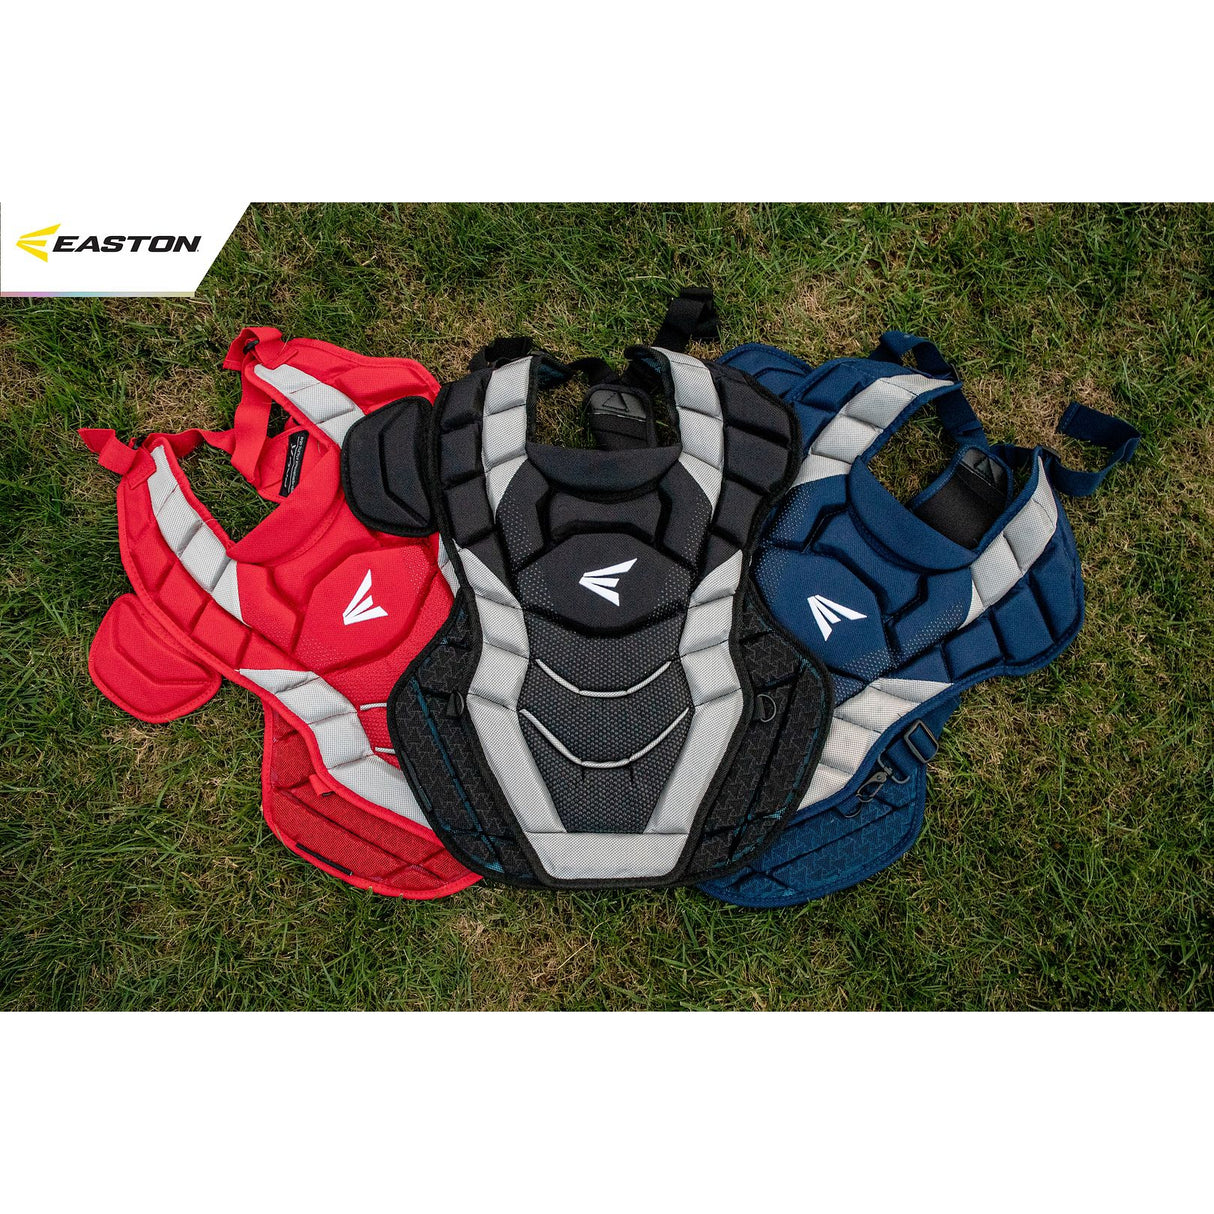 Easton Pro x A165446 Adult Baseball Chest Protector - Red/Silver